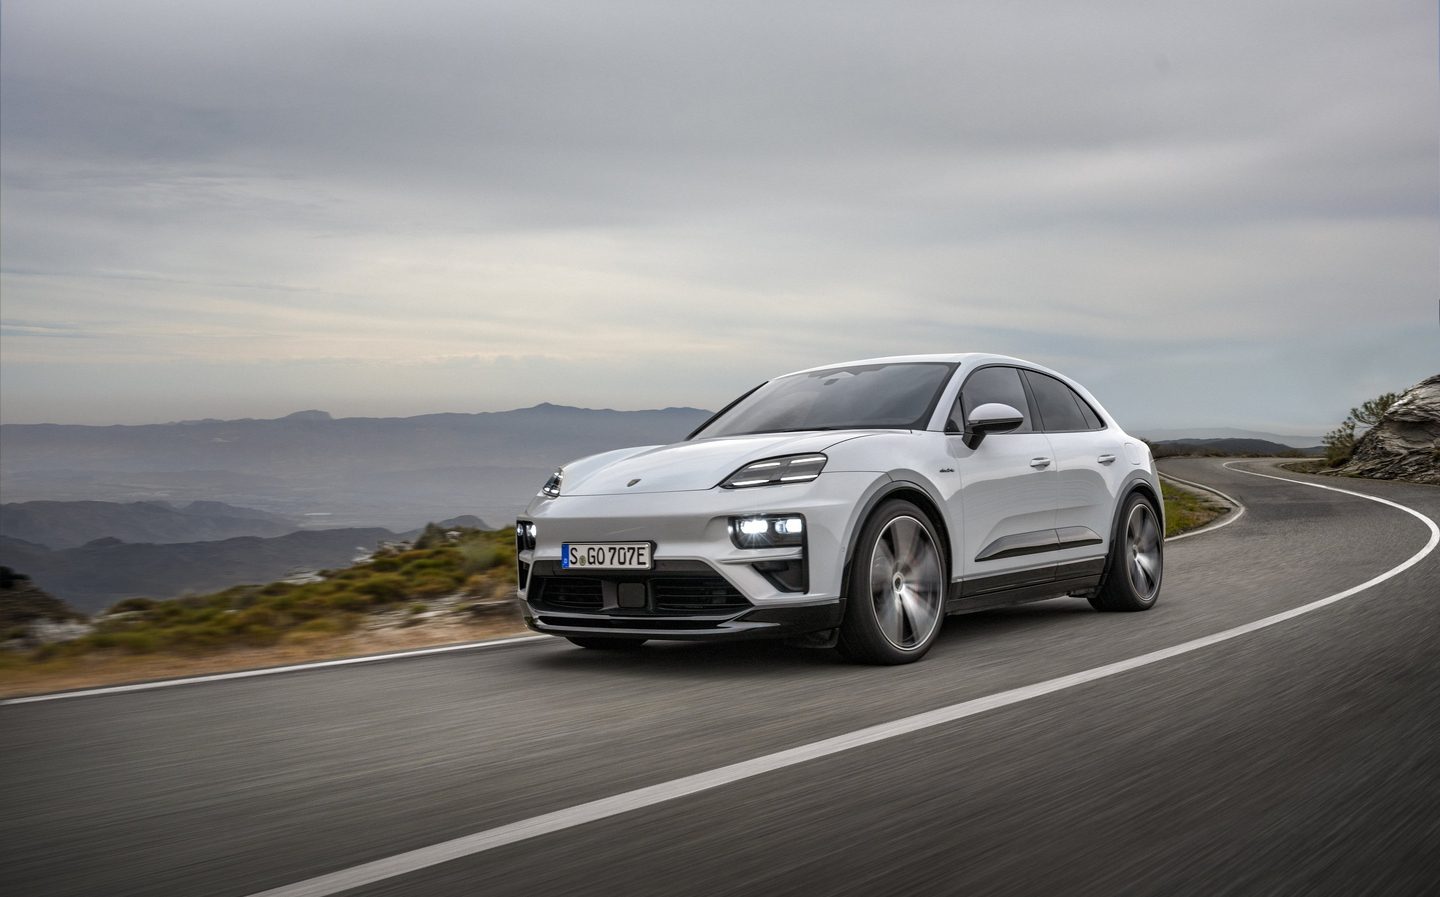 Macan EV Official Macan EV Specs & Pictures Before Reveal! 380 mile range and 630bhp Porsche-Macan-Turbo-electric-2024-004